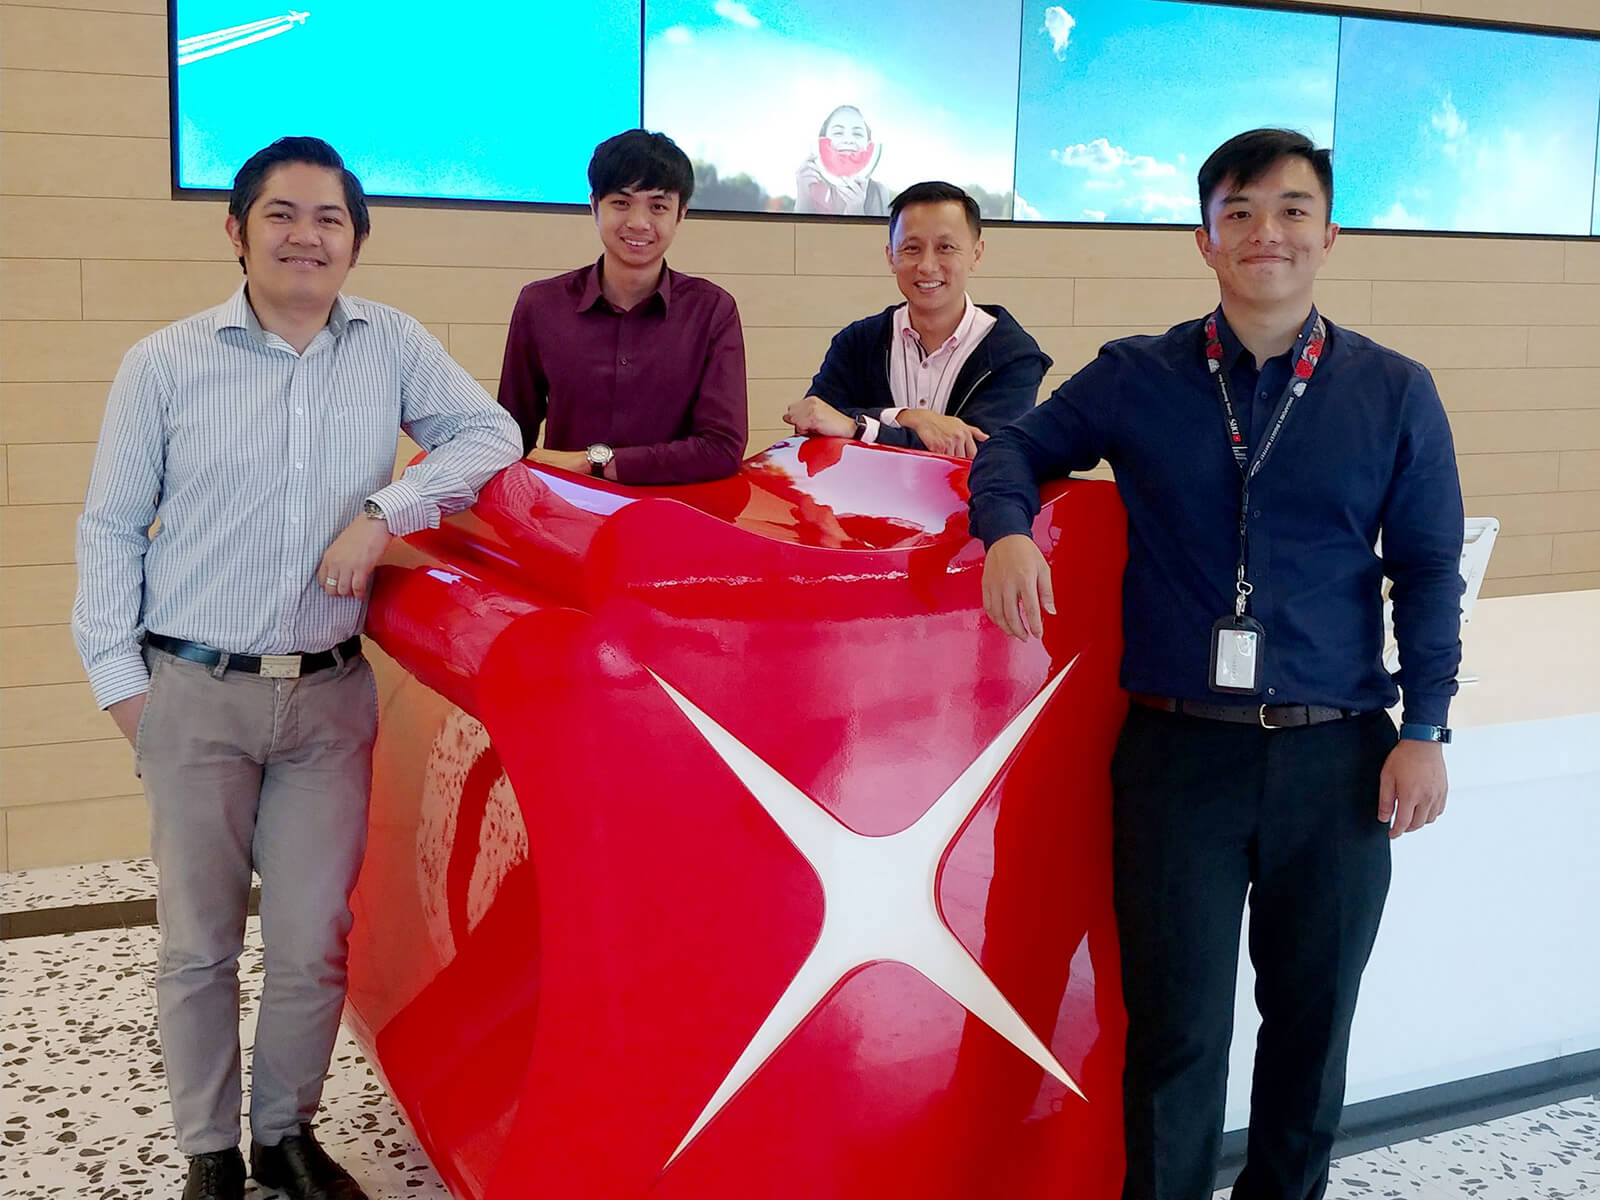 DigiPen Singapore alumni Izak Foong and Farris Chua pose with co-workers in DBS Bank lobby